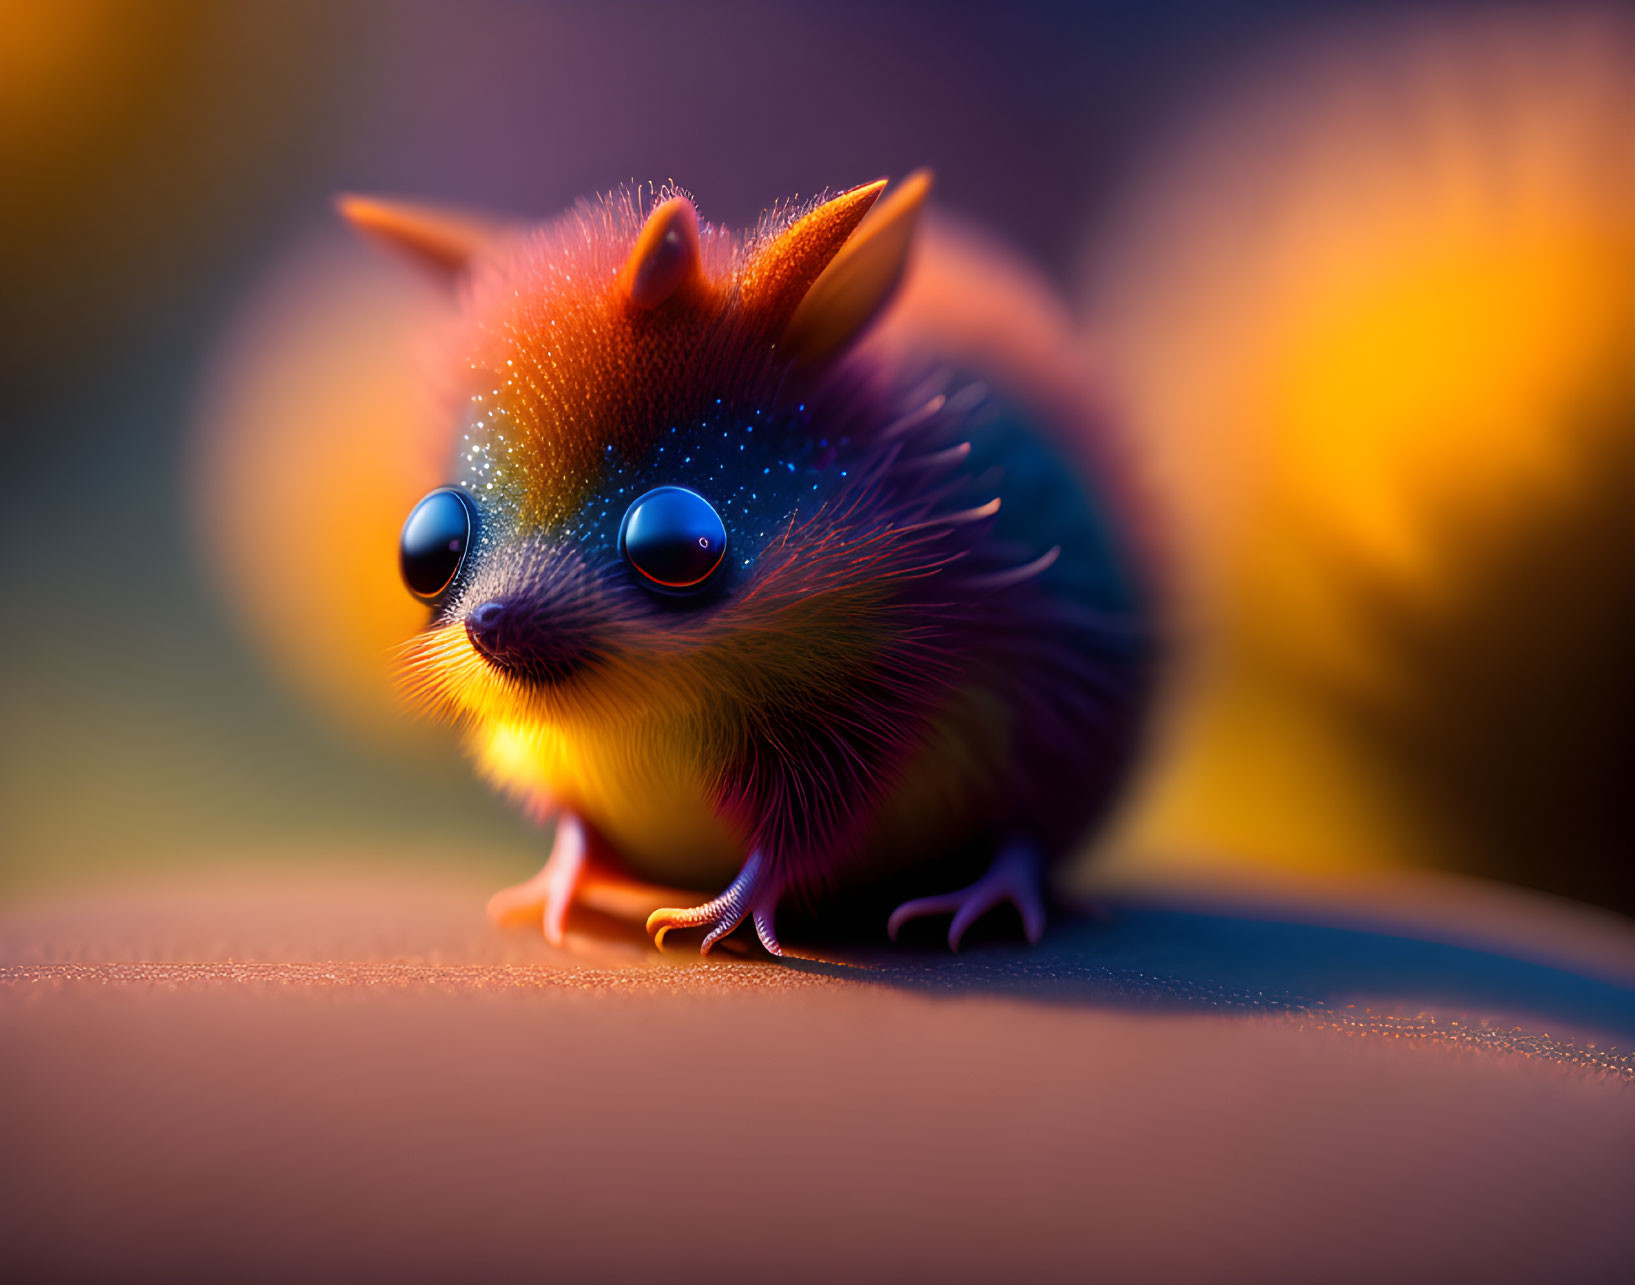 Fox-hedgehog hybrid with glowing orange fur and blue quills in colorful fantasy scene